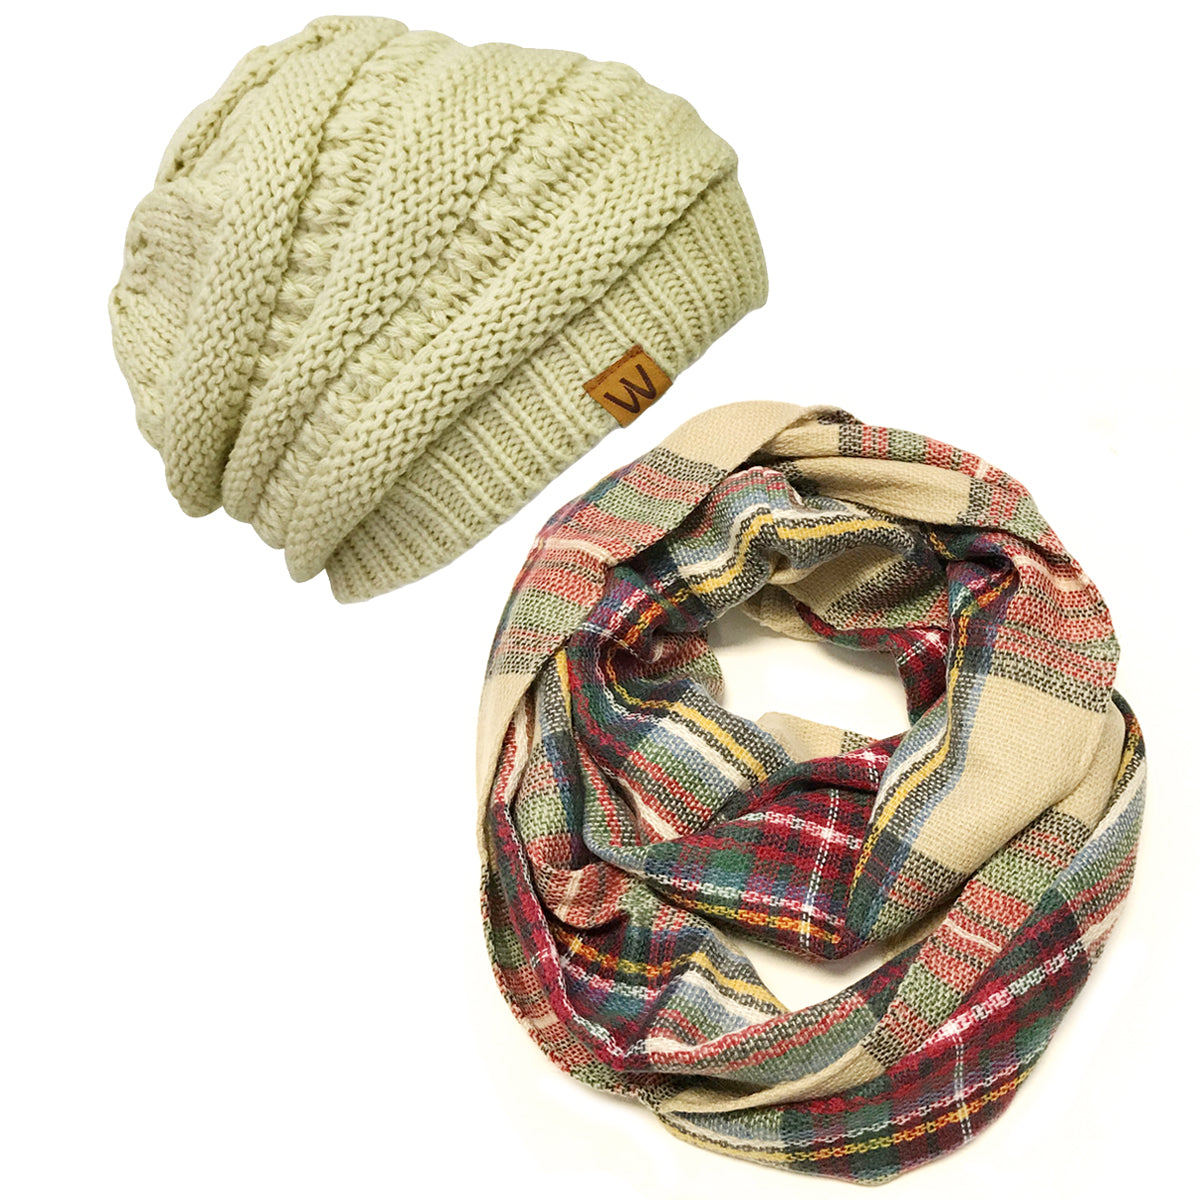 Wrapables Plaid Print Infinity Scarf and Beanie Hat Set